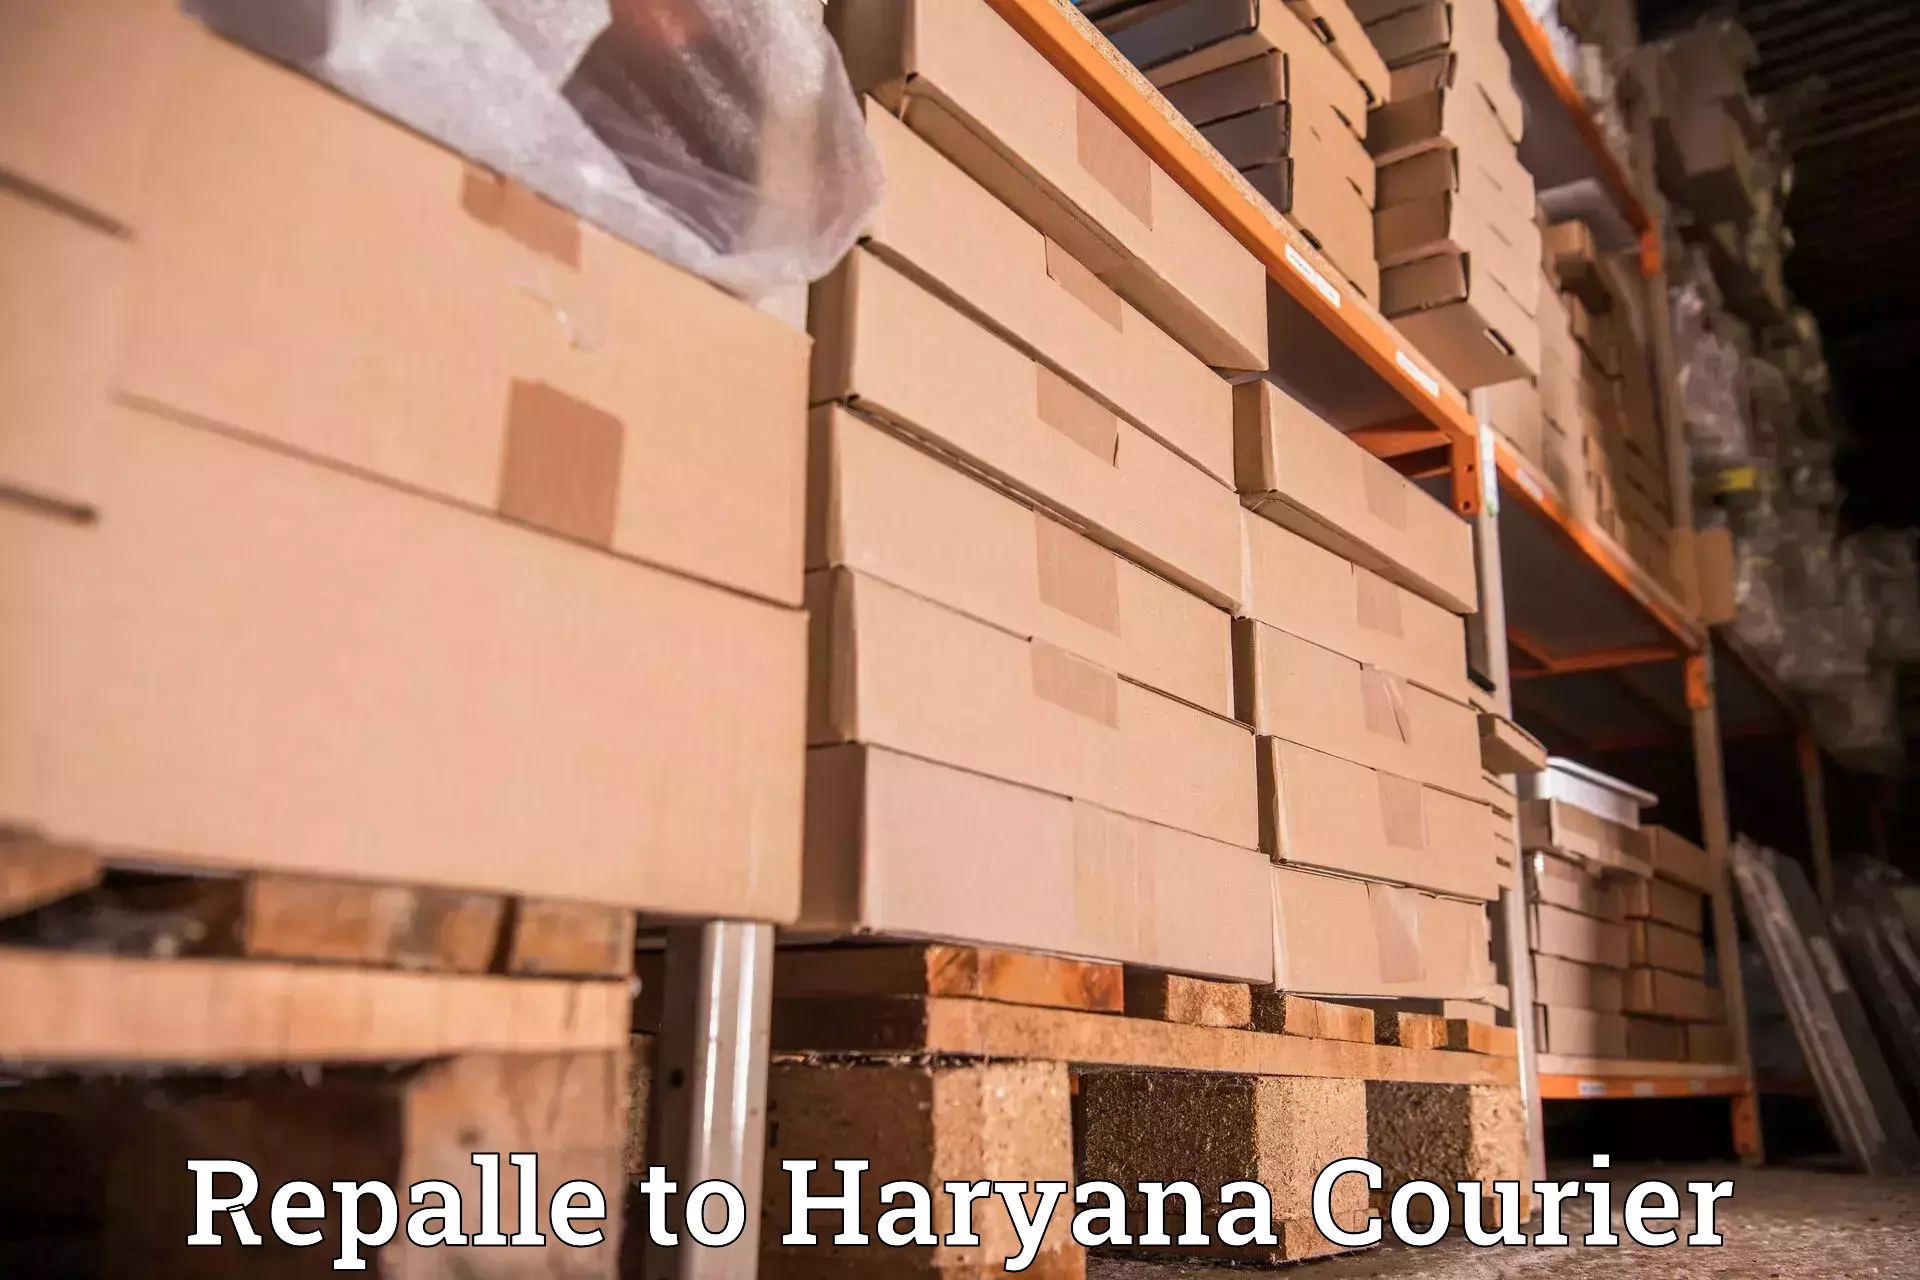 Courier rate comparison Repalle to Haryana